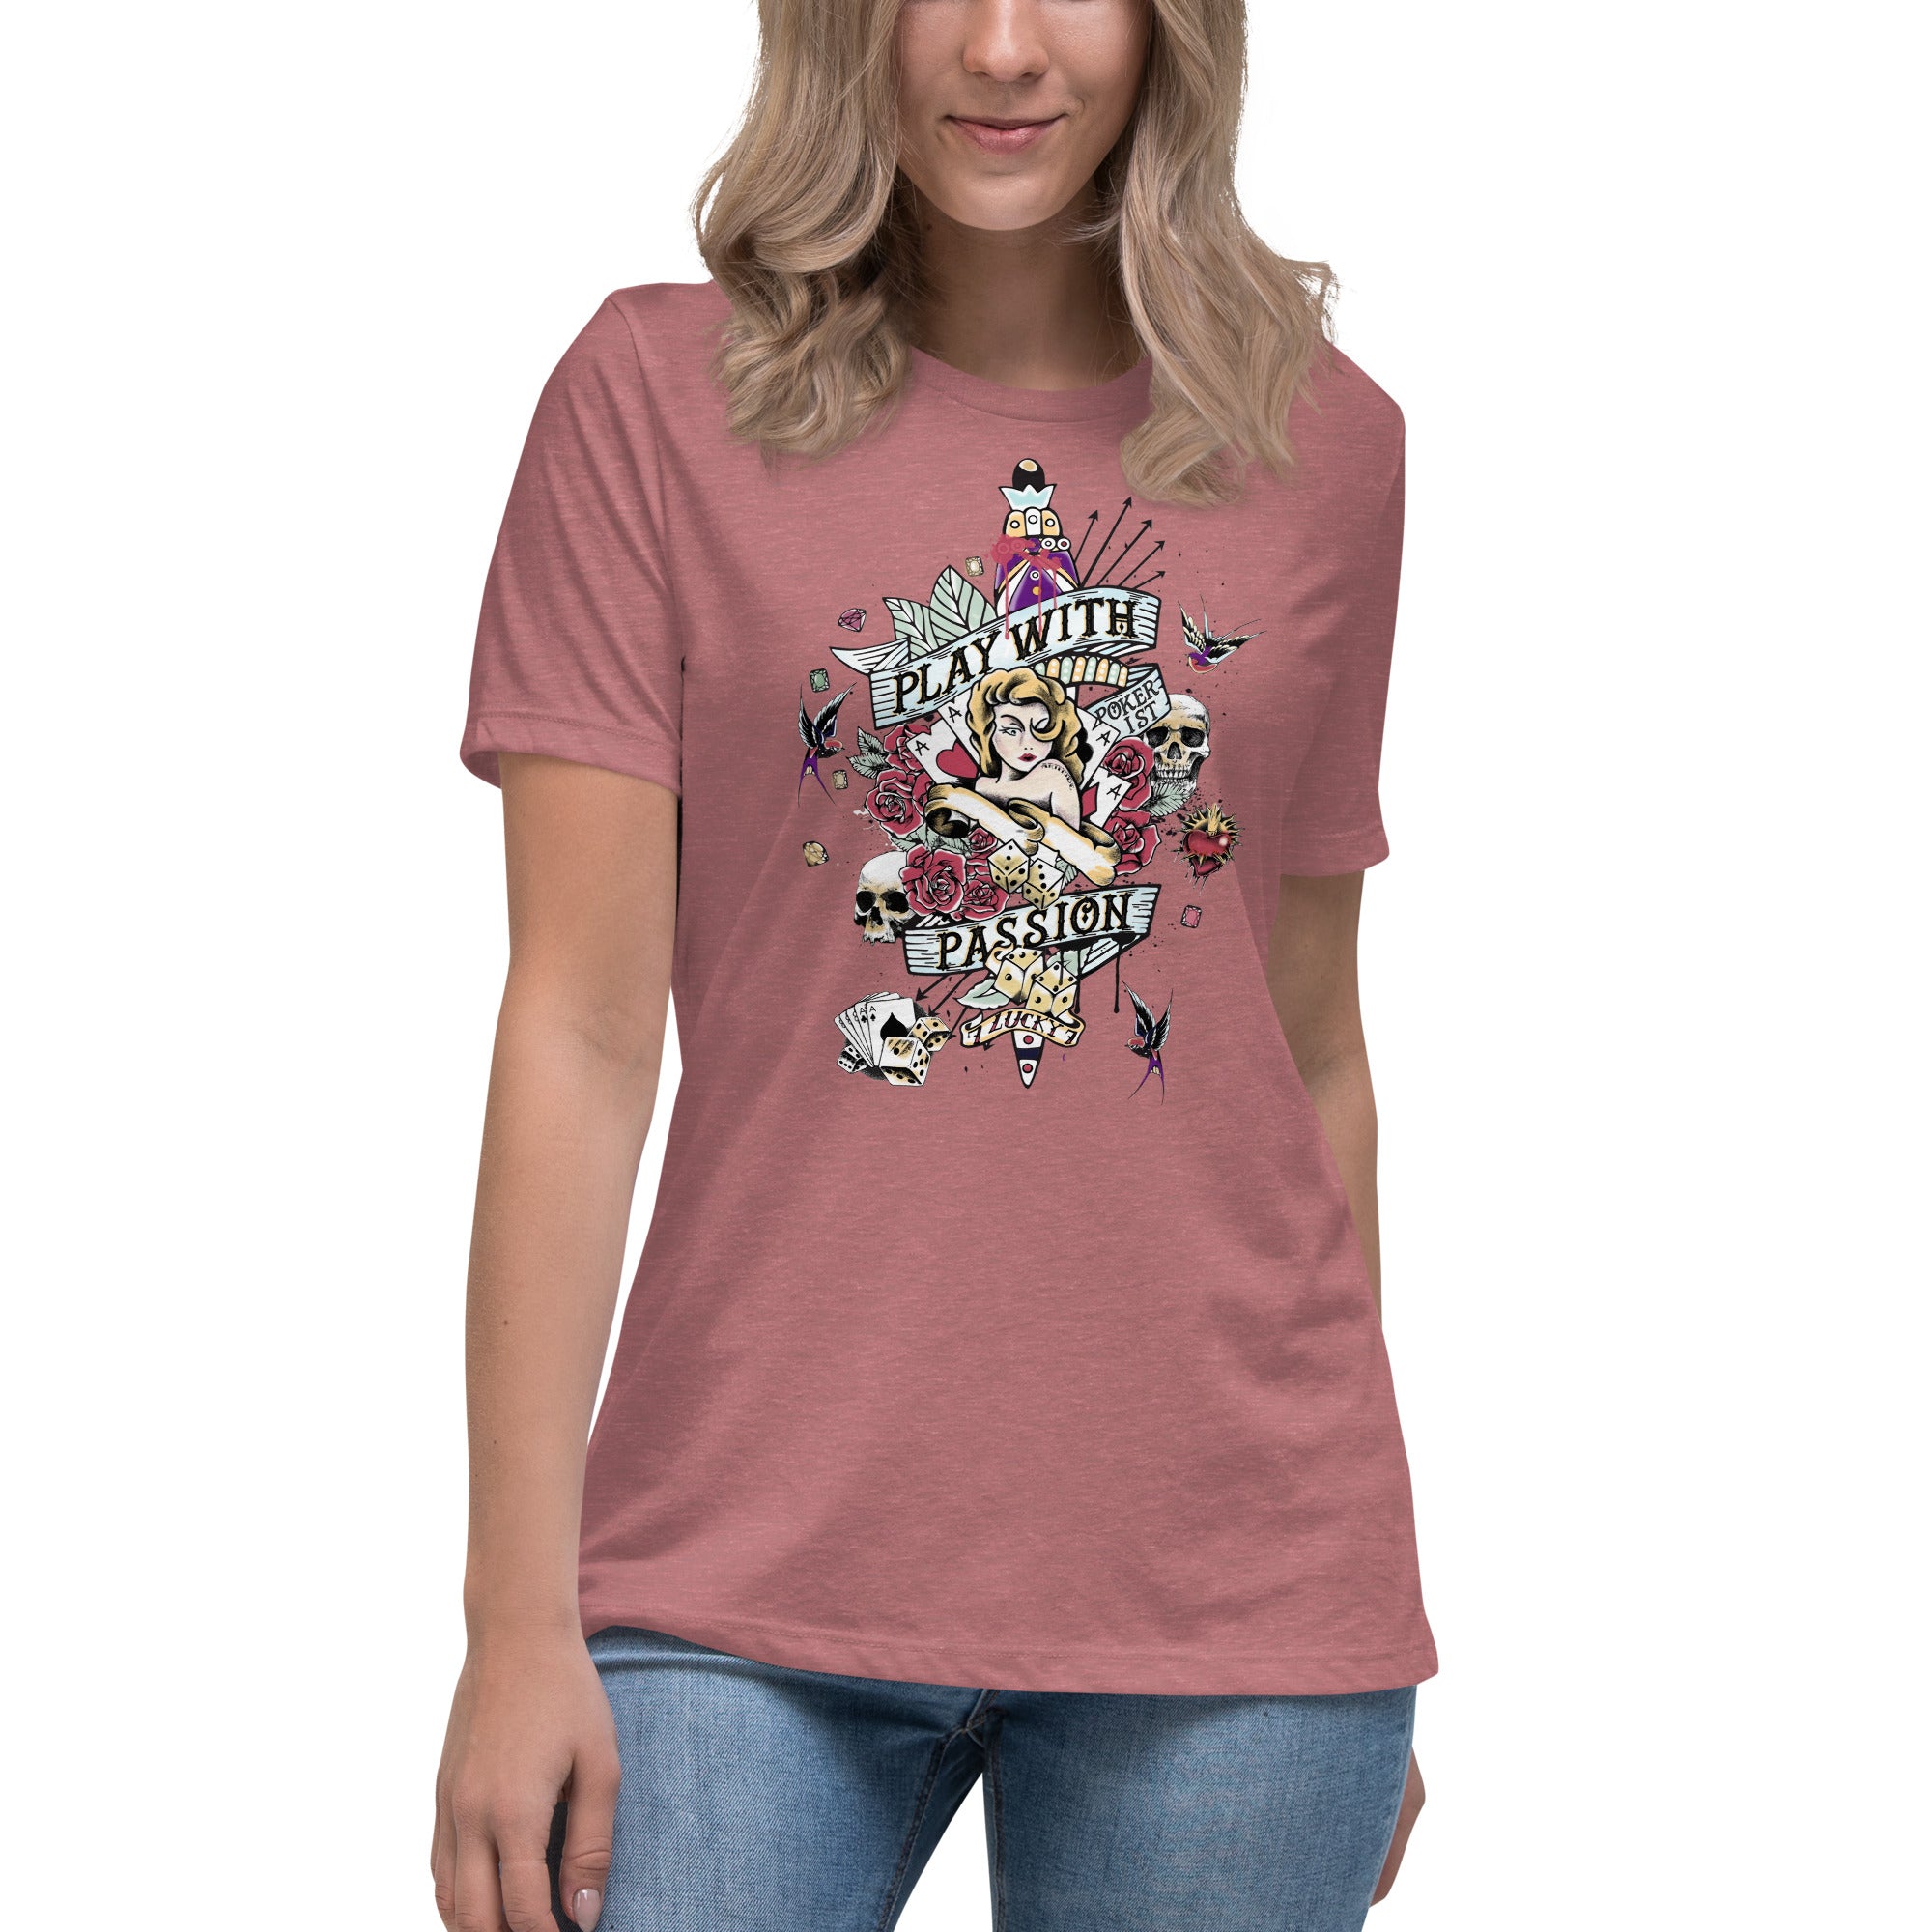 Play with Passion - Women's Relaxed T-Shirt